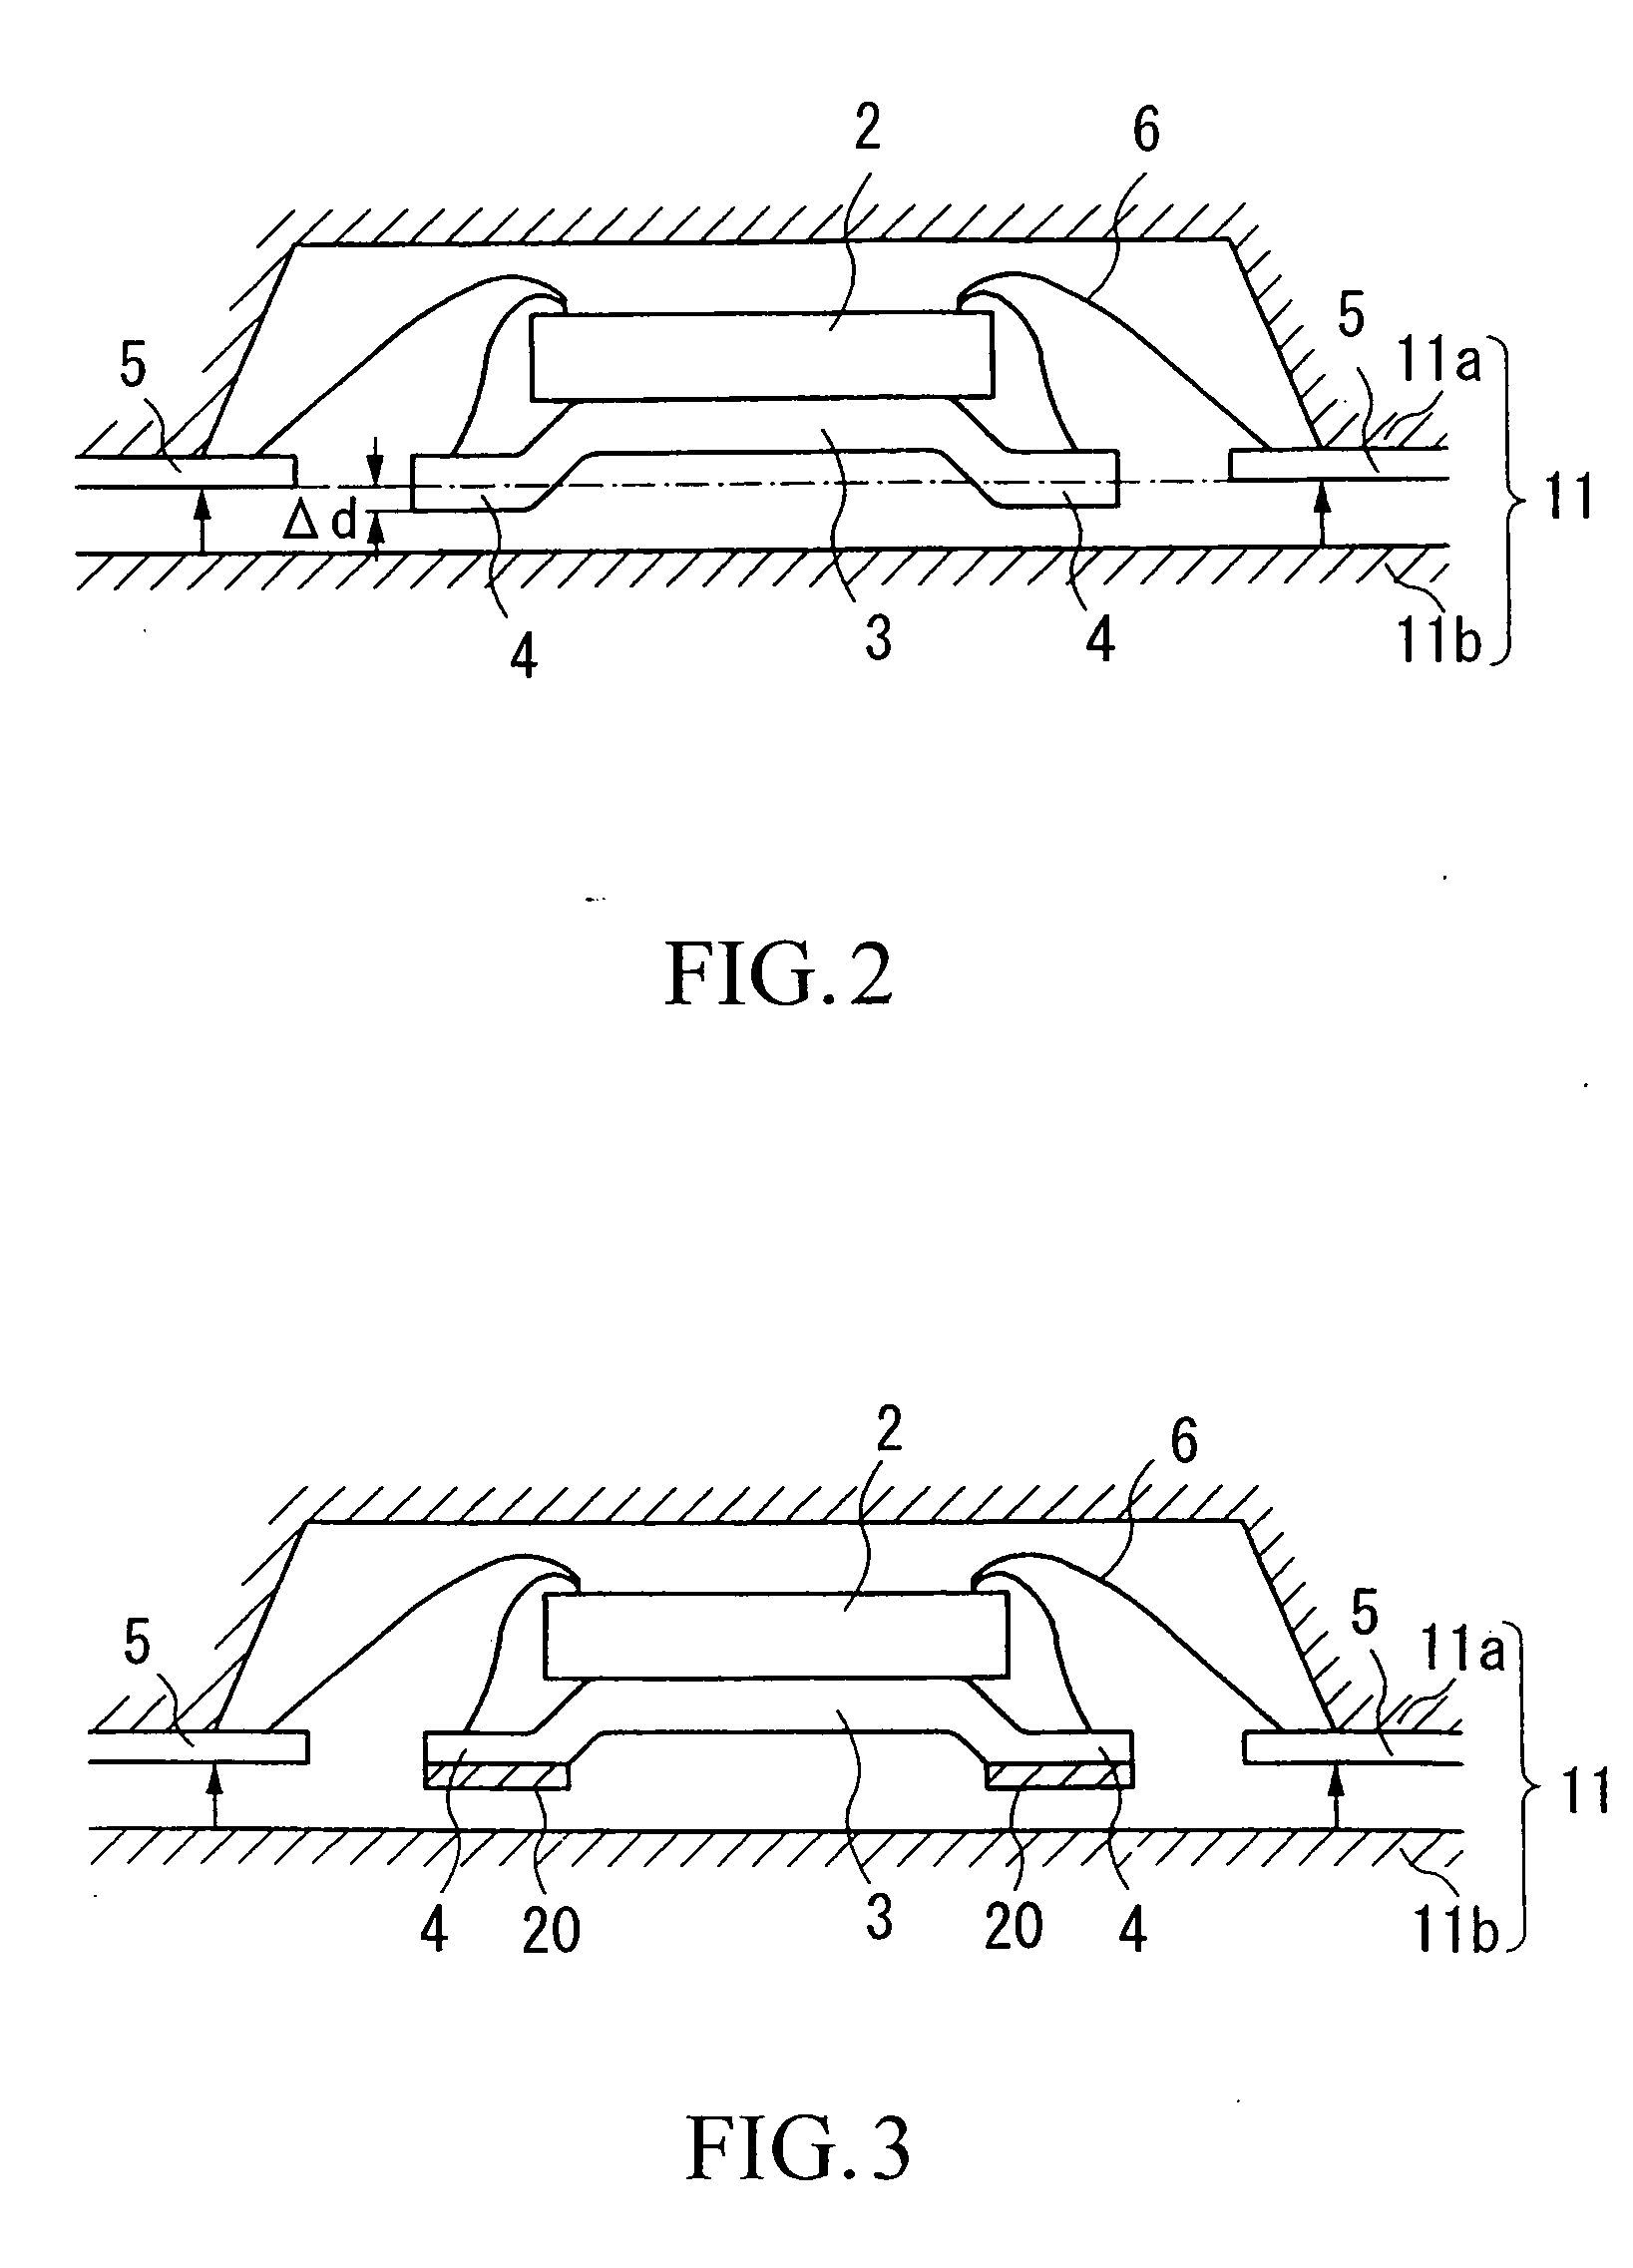 Semiconductor device and package, and method of manufacturer therefor